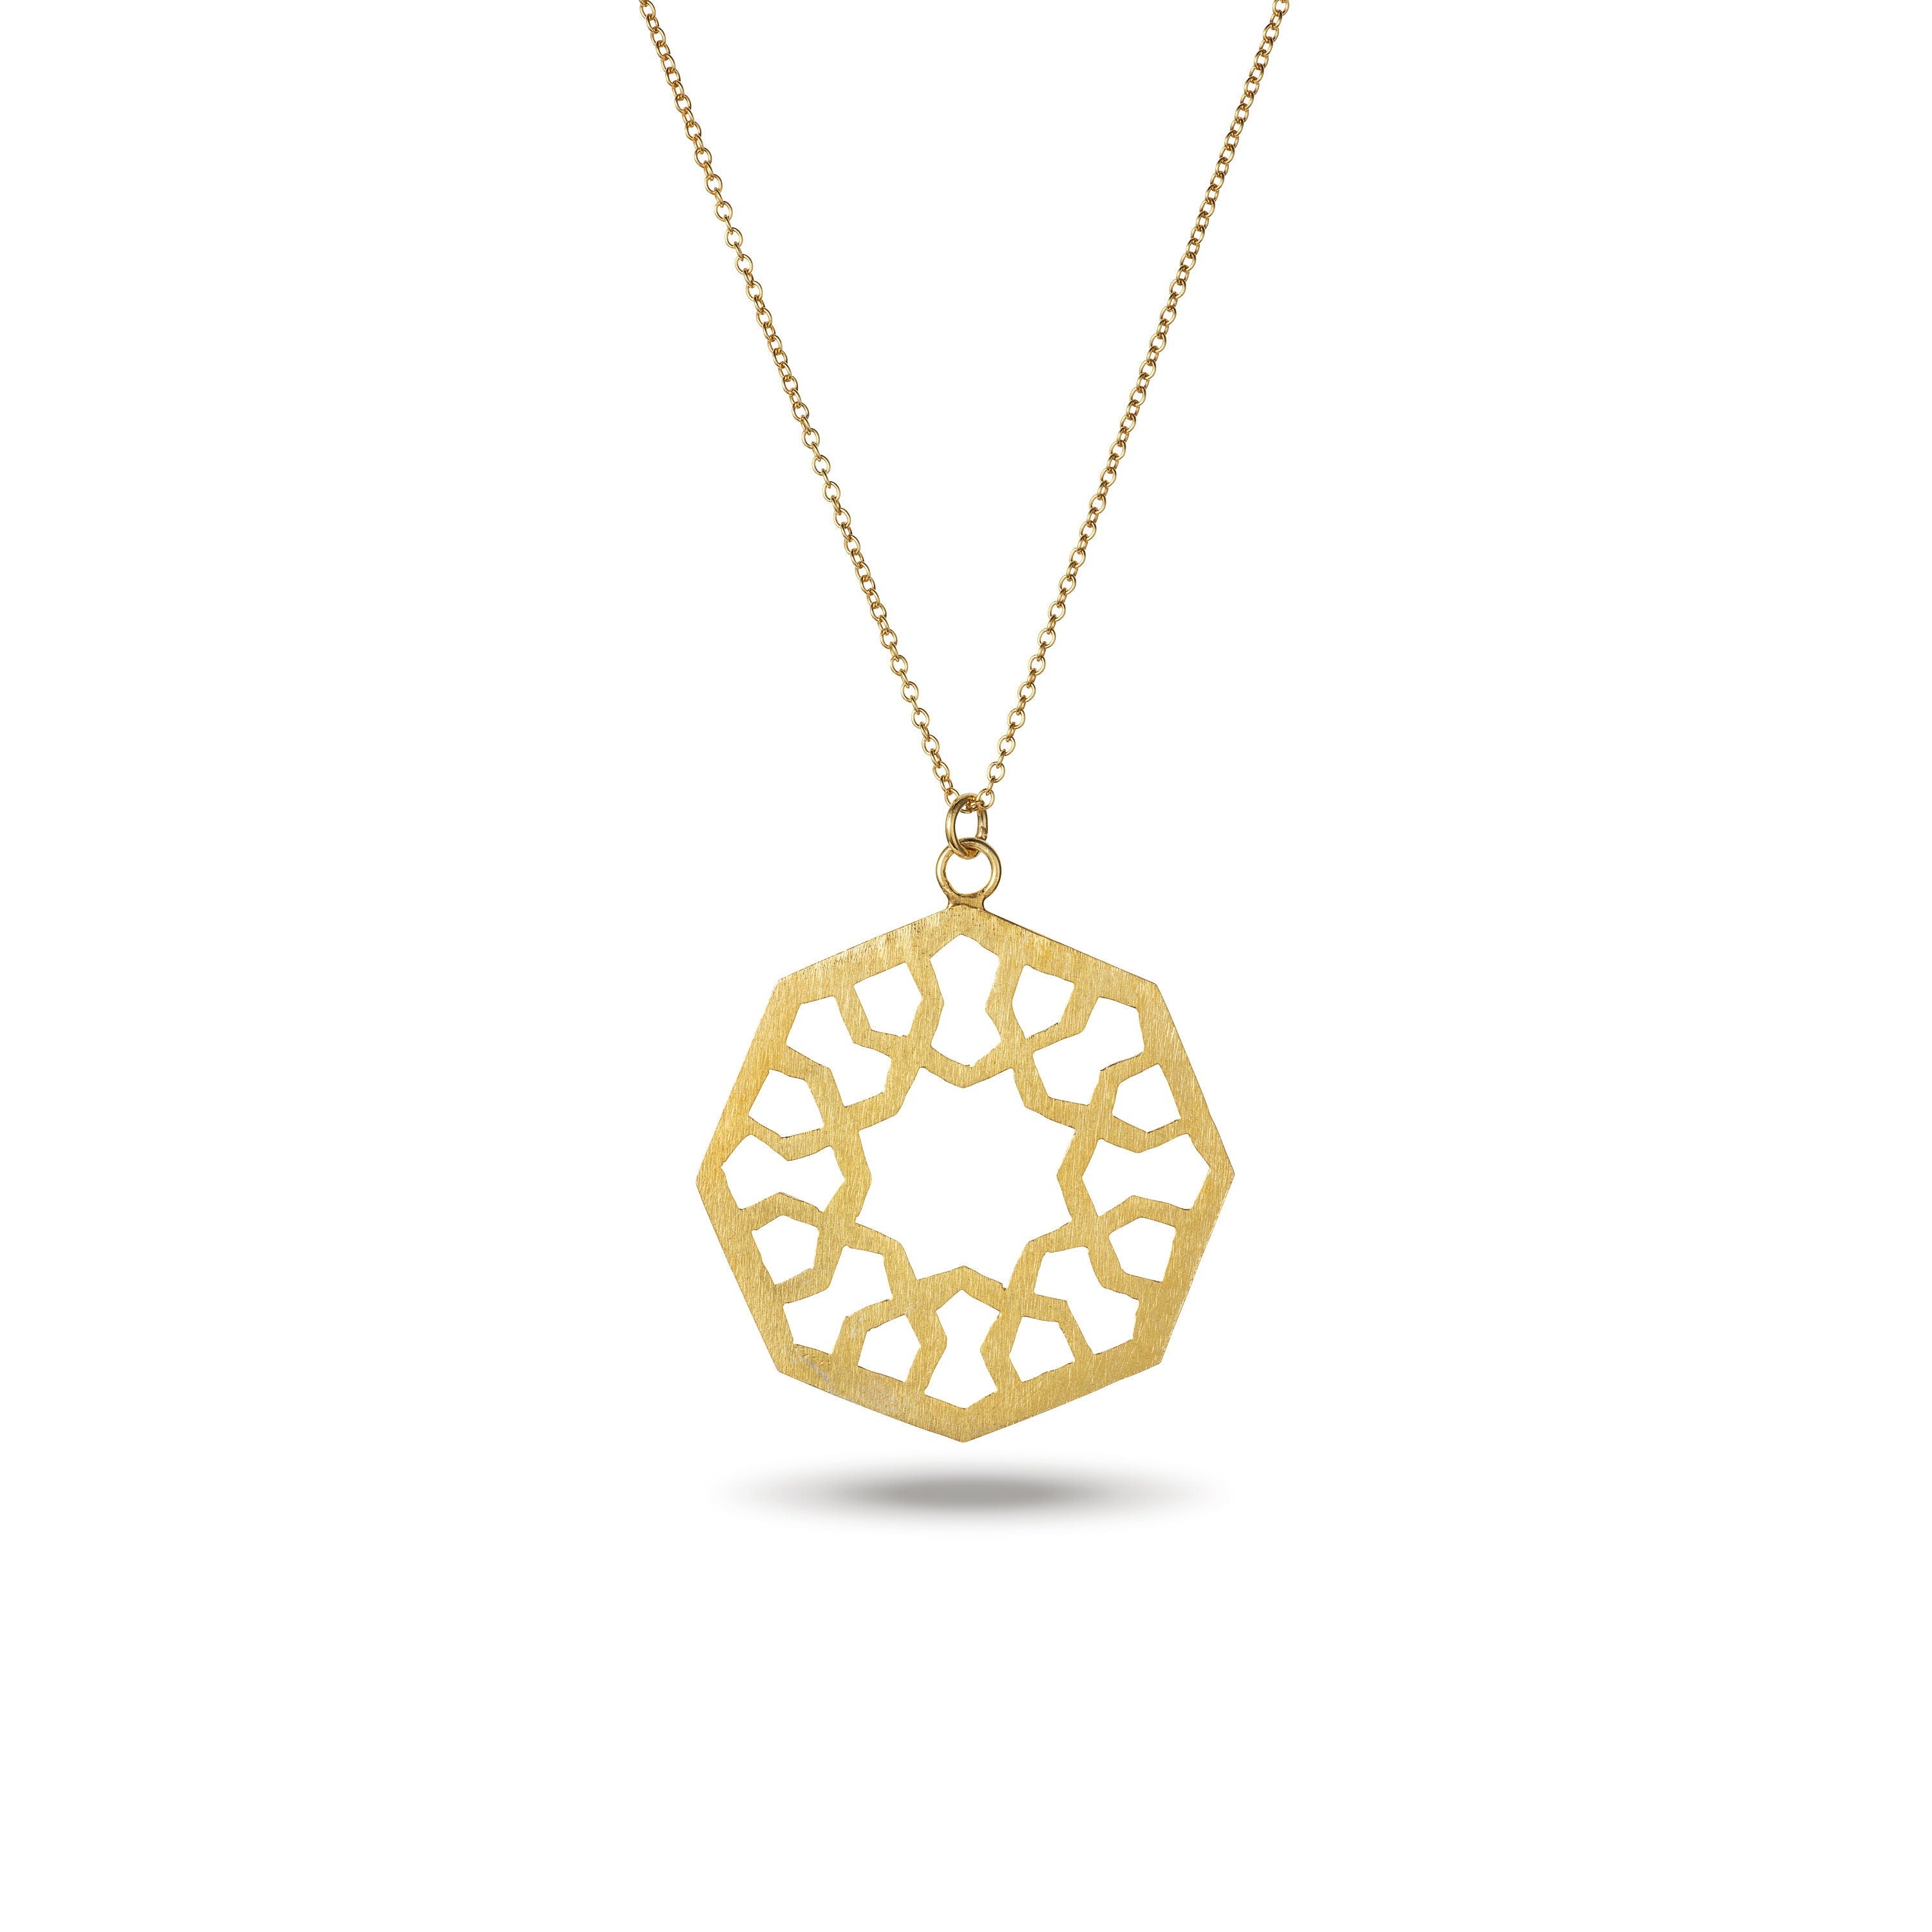 Handmade Afghan Gold Plated Brass Chain Pendant Necklace Elegant Inspired Jewelry Tessellated Motif Geometric Abstract Gift for Her